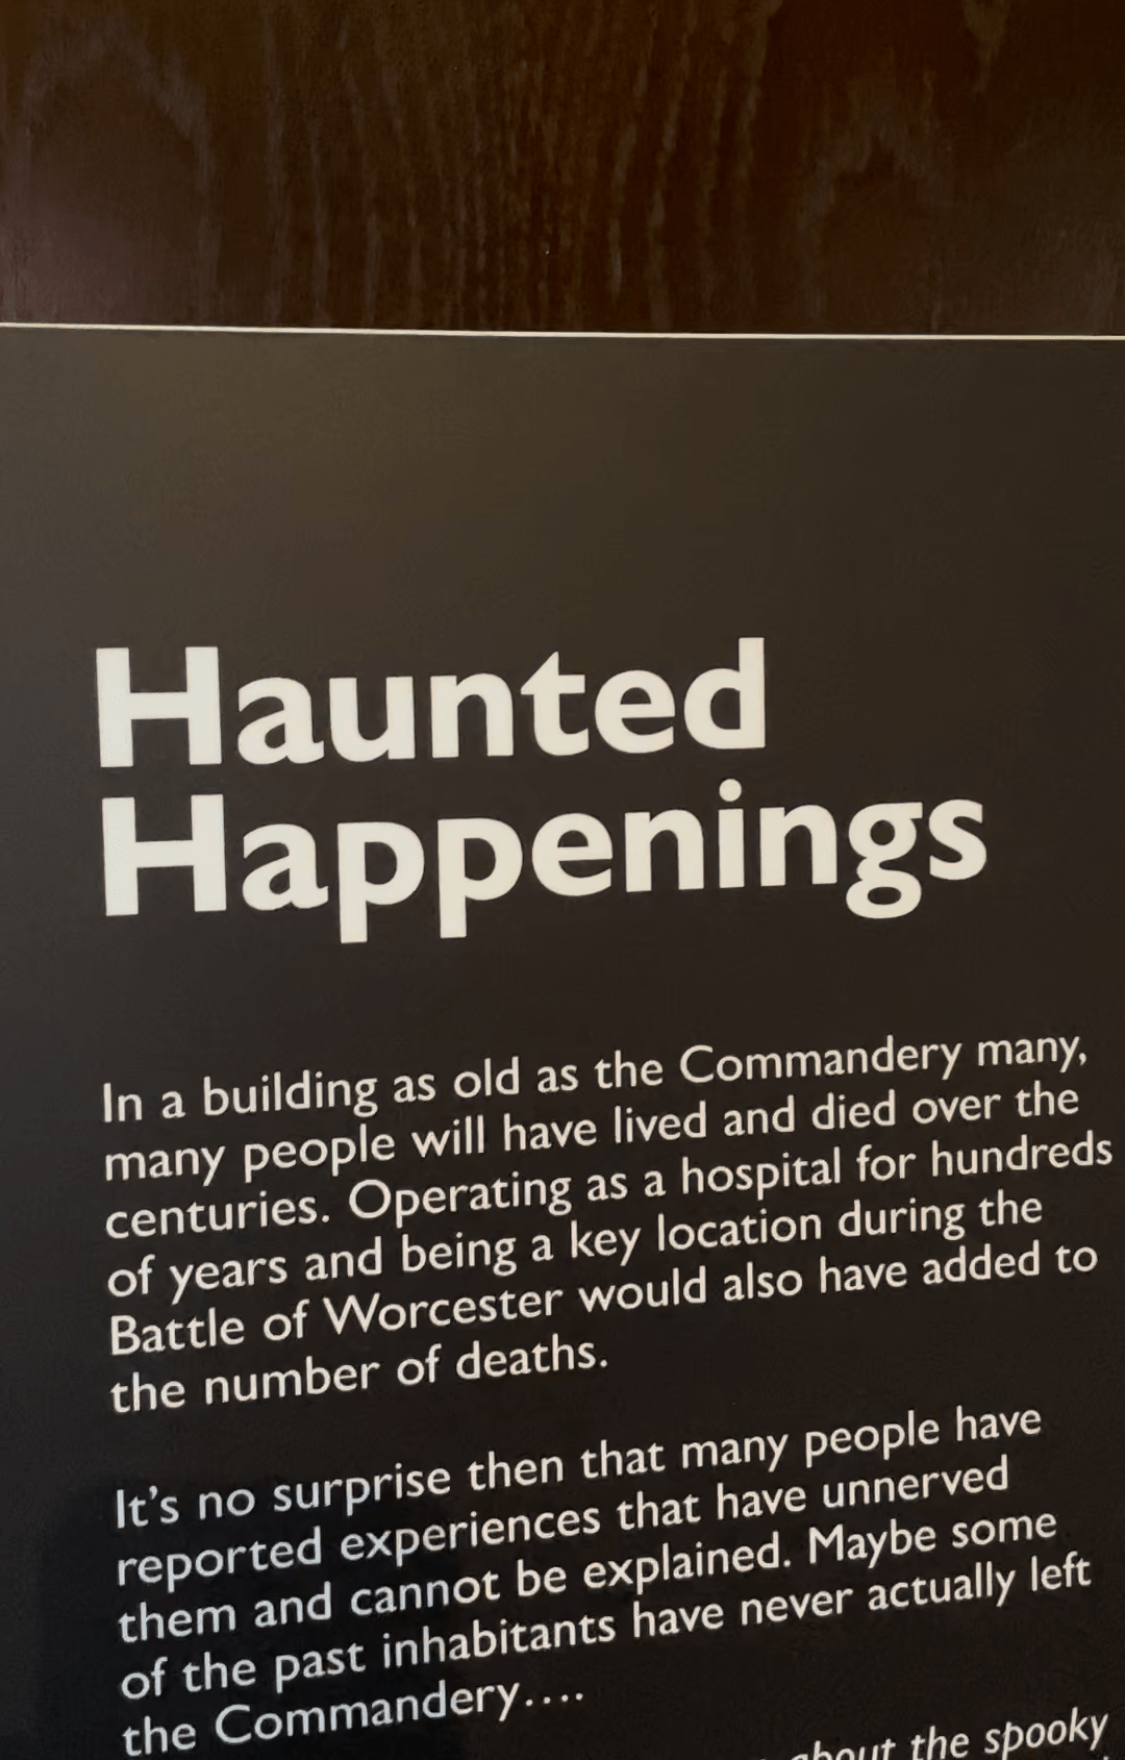 A photo showing a section of an information panel titled "Haunted Happenings".